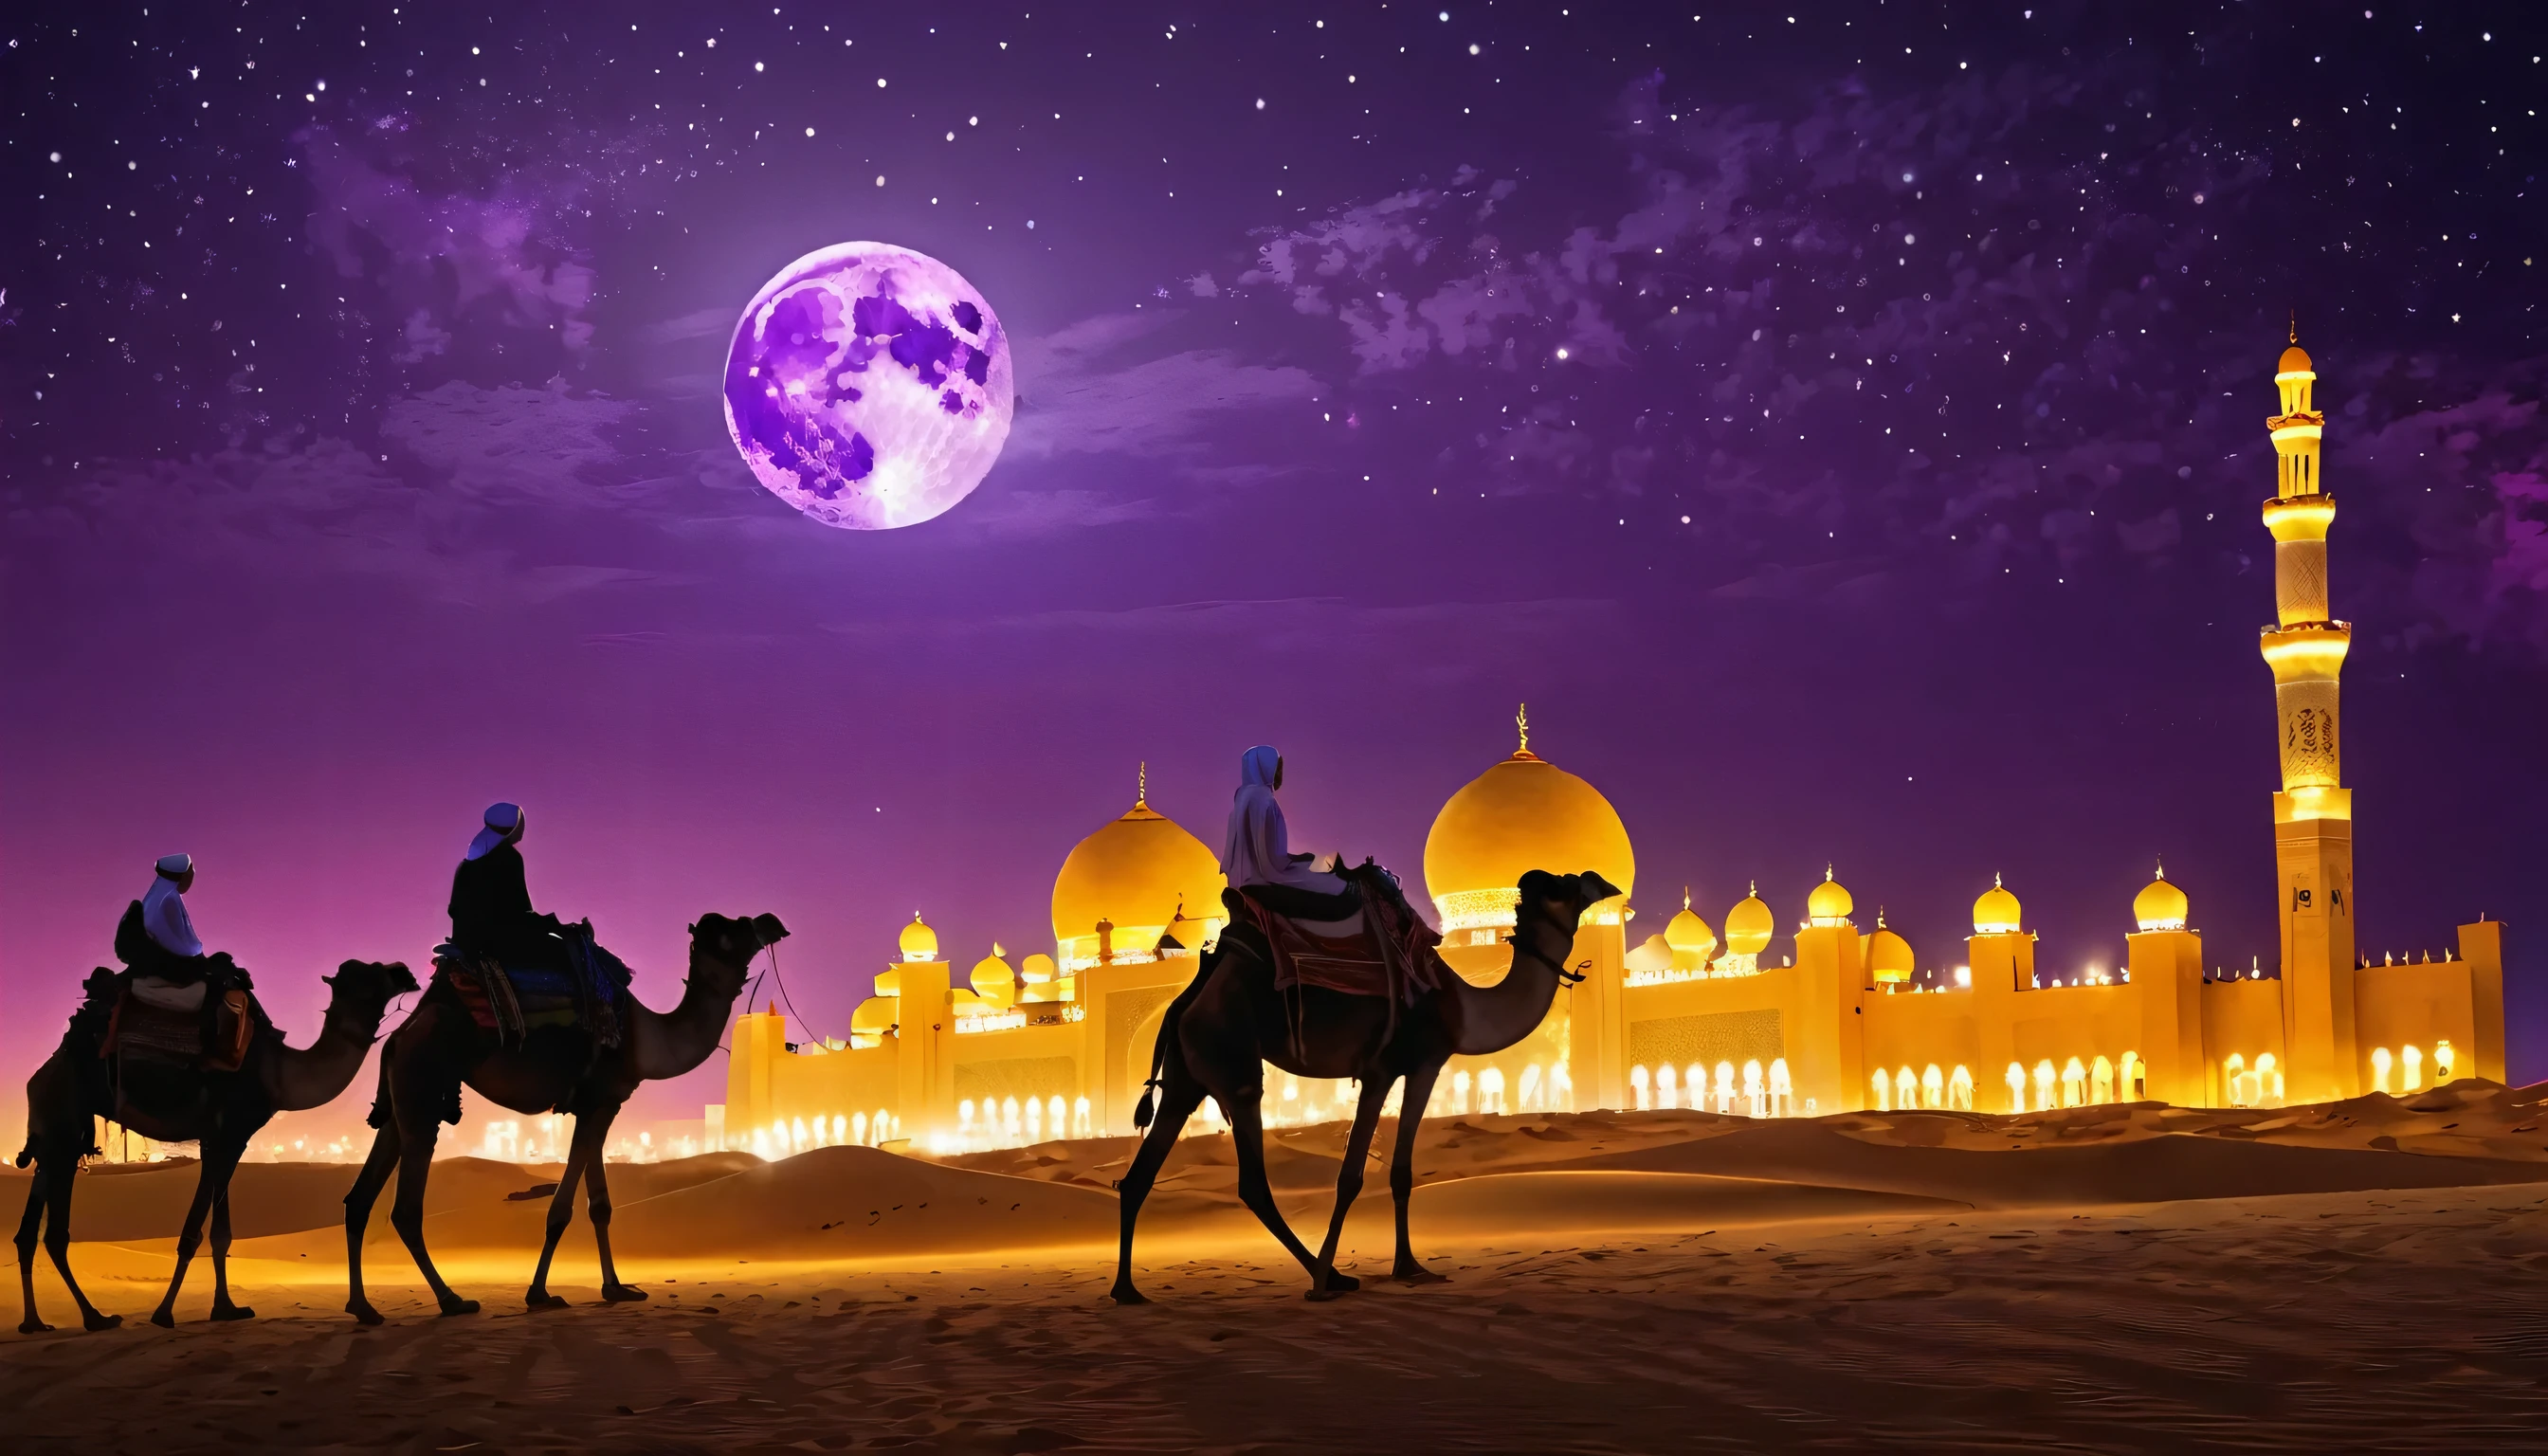 Arabia, Arabian scenery, full moon, gigantic moon behind the horizon, night sky, starry sky, purple sky, people riding camels, night, outdoors, silhouette, palm trees, buildings and mosque in the background